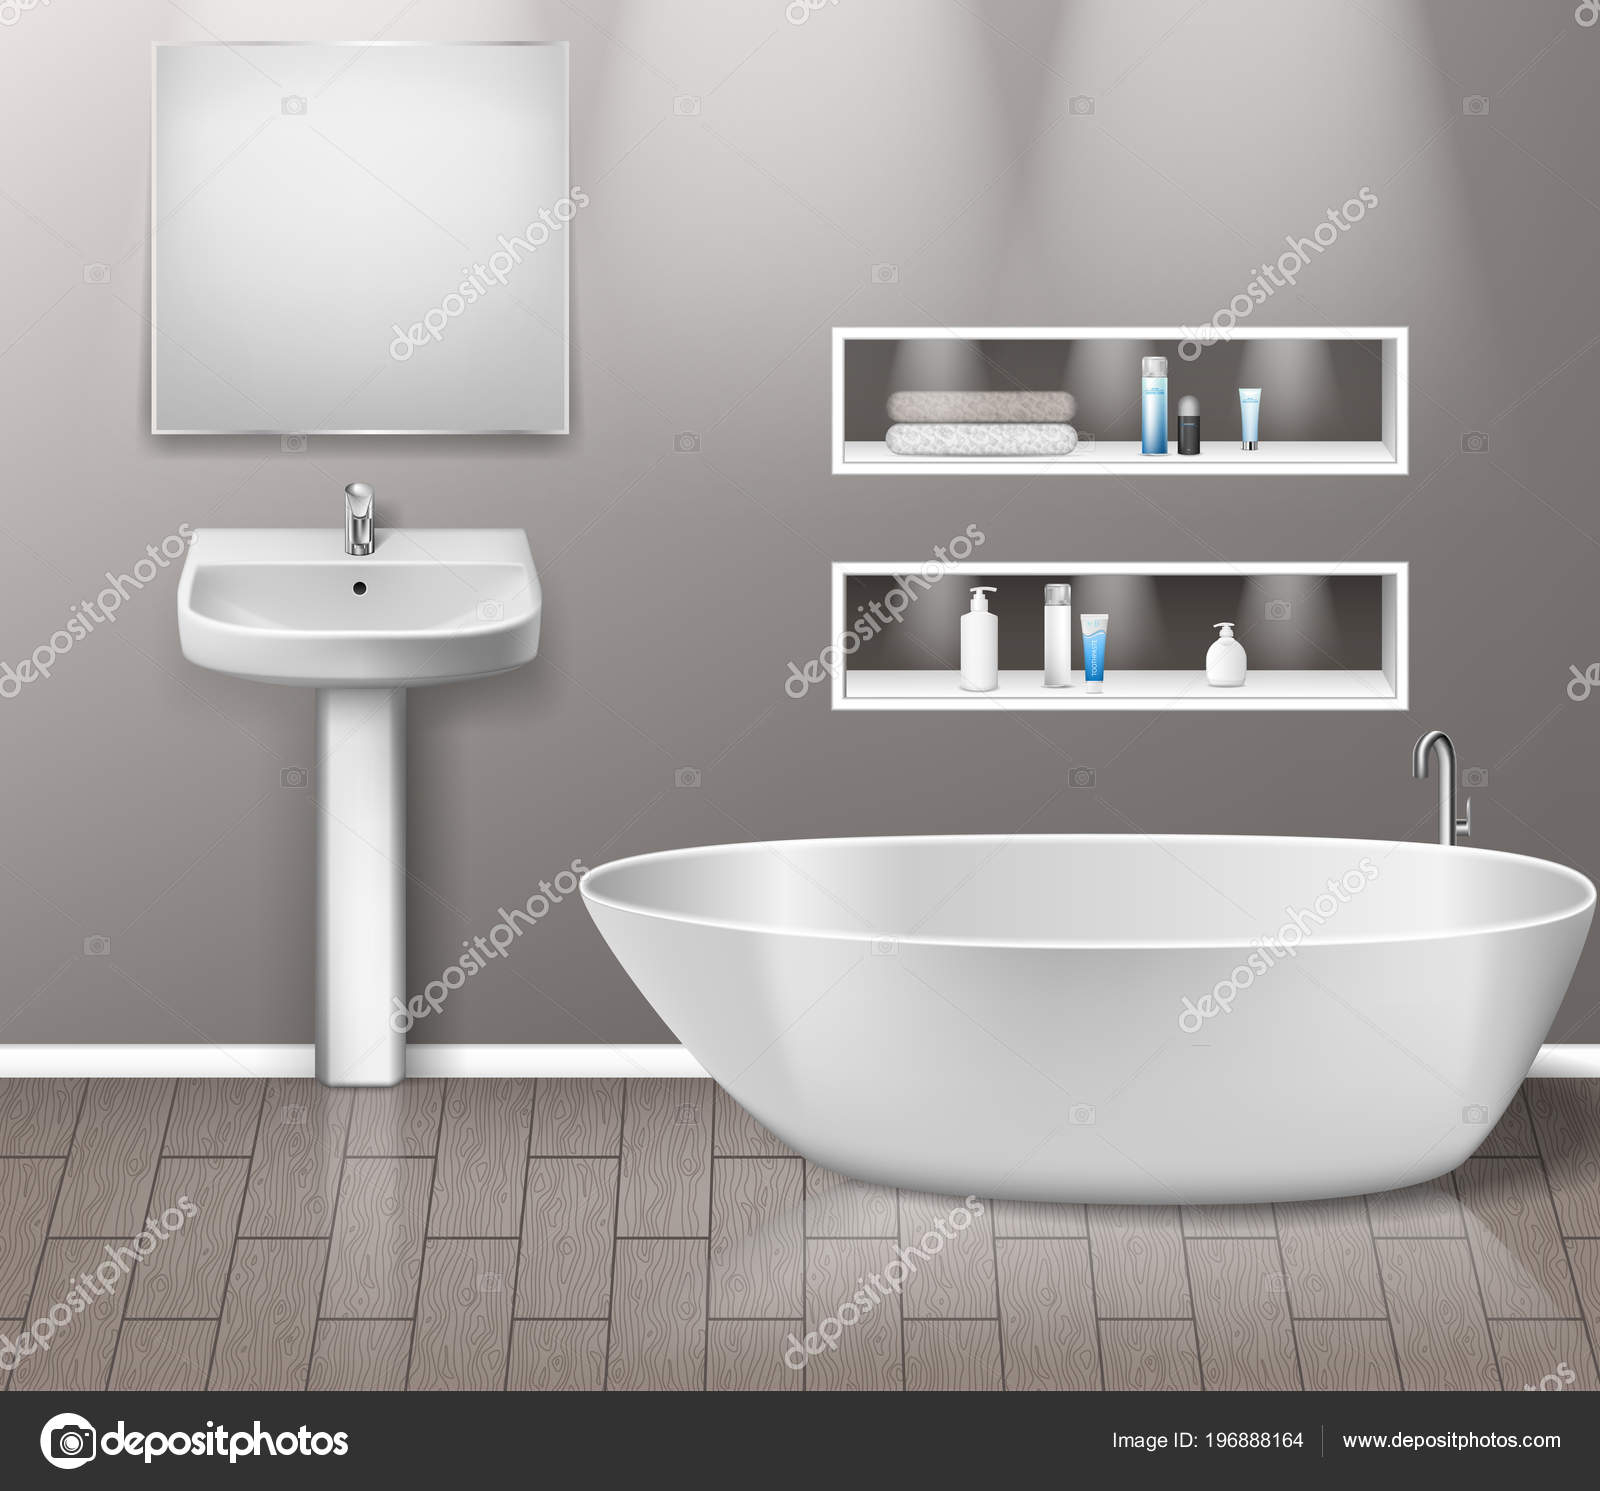 Realistic Bathroom Furniture Interior With Modern Bathroom Sink intended for dimensions 1600 X 1491